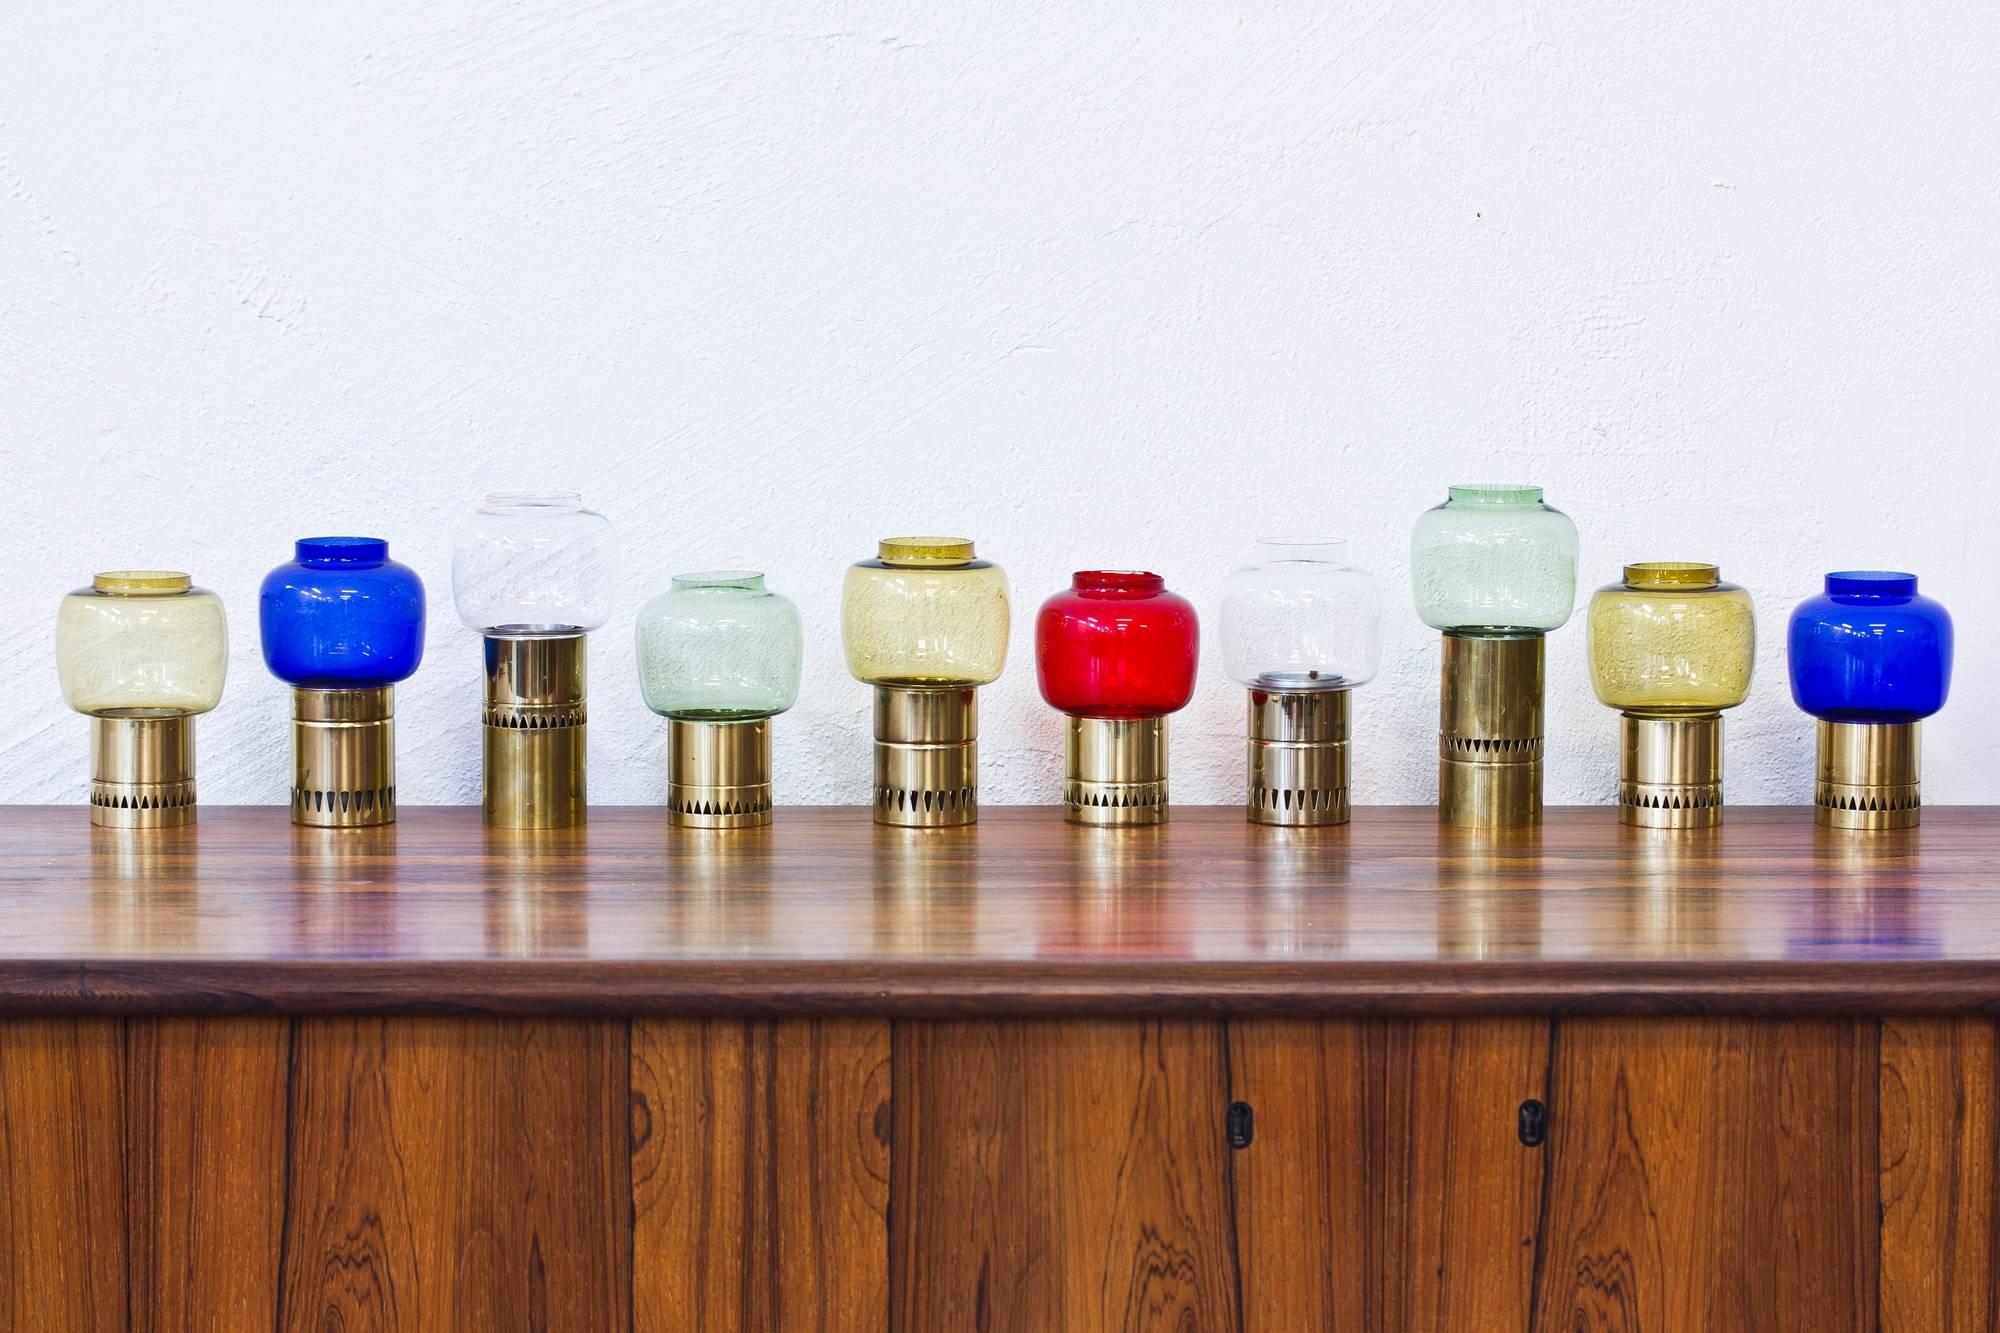 Collection of ten candleholders designed by Hans-Agne Jakobsson in the 1960s. Polished brass and handblown glass shades in different colors. Produced by his own company in Markaryd, Sweden. The candleholders are individually signed with label. Very